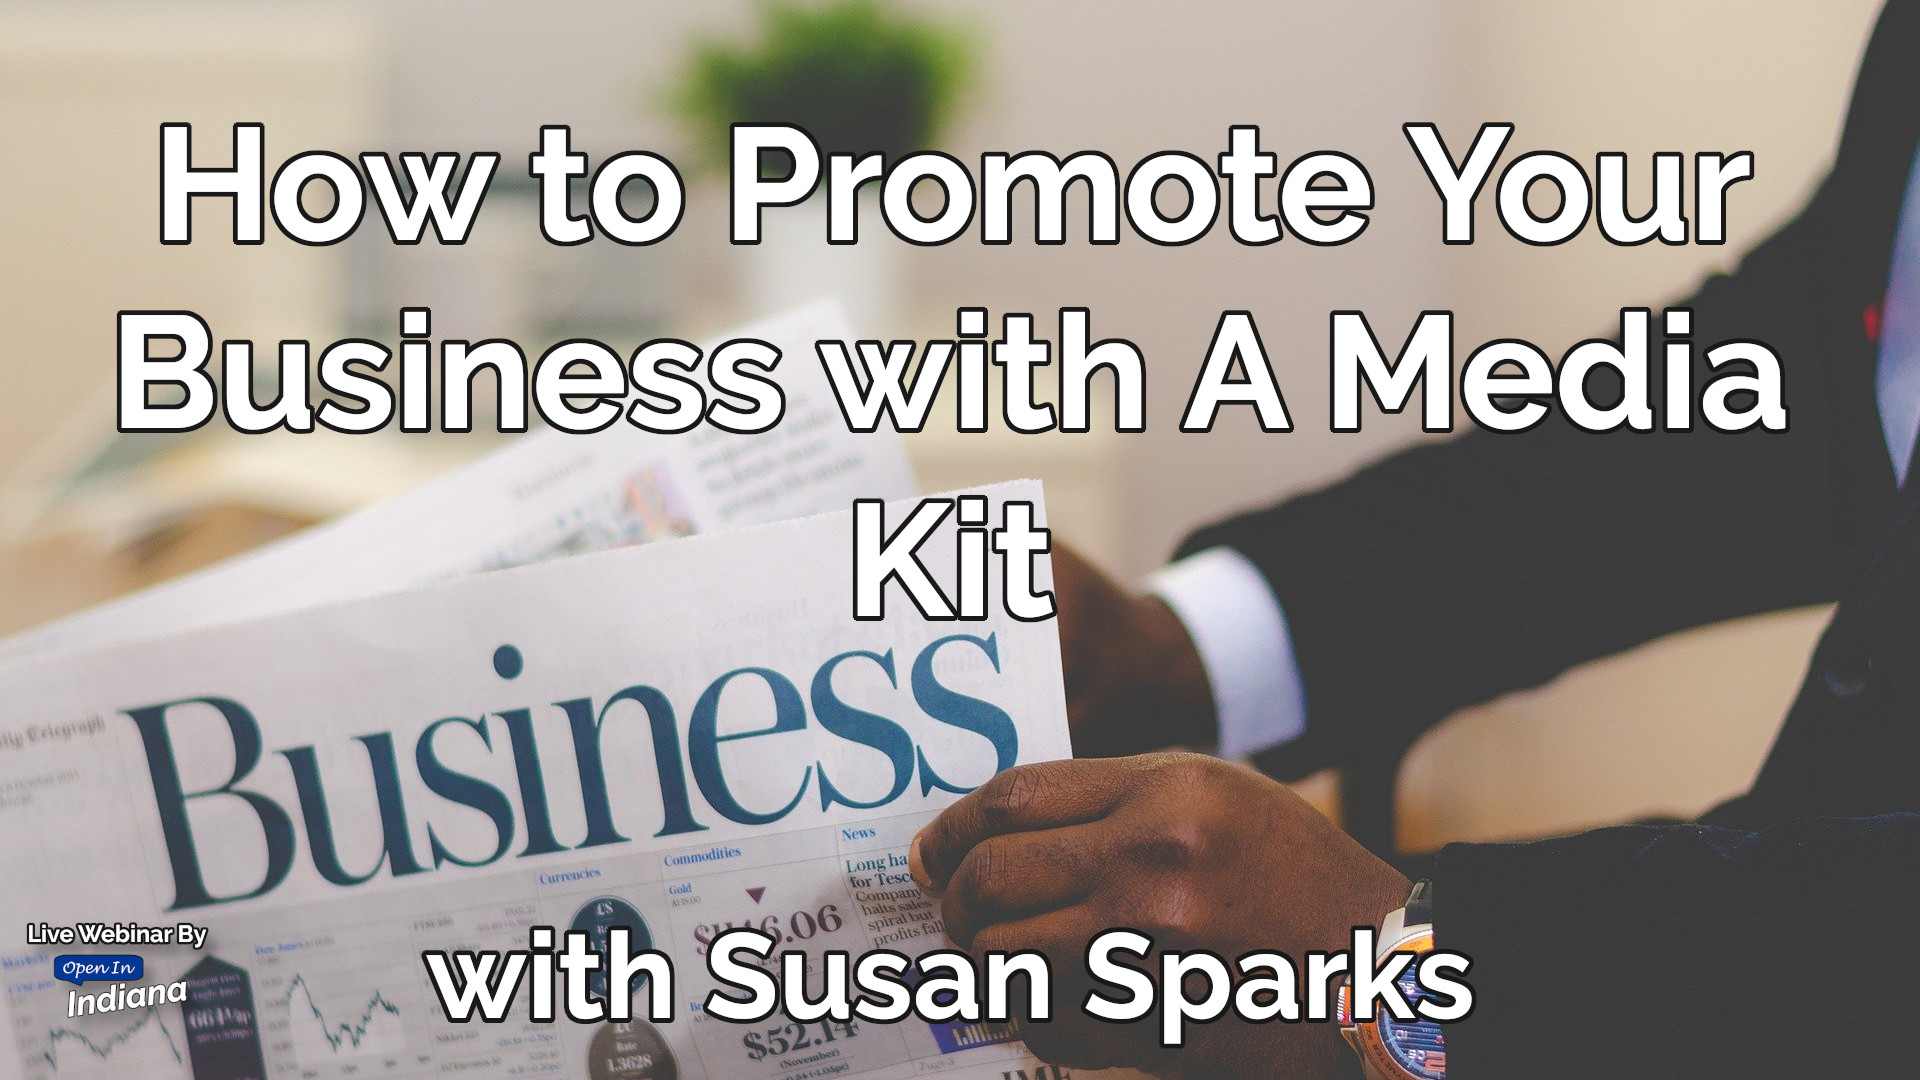 How to Promote Your Business with a Media Kit with Susan Sparks